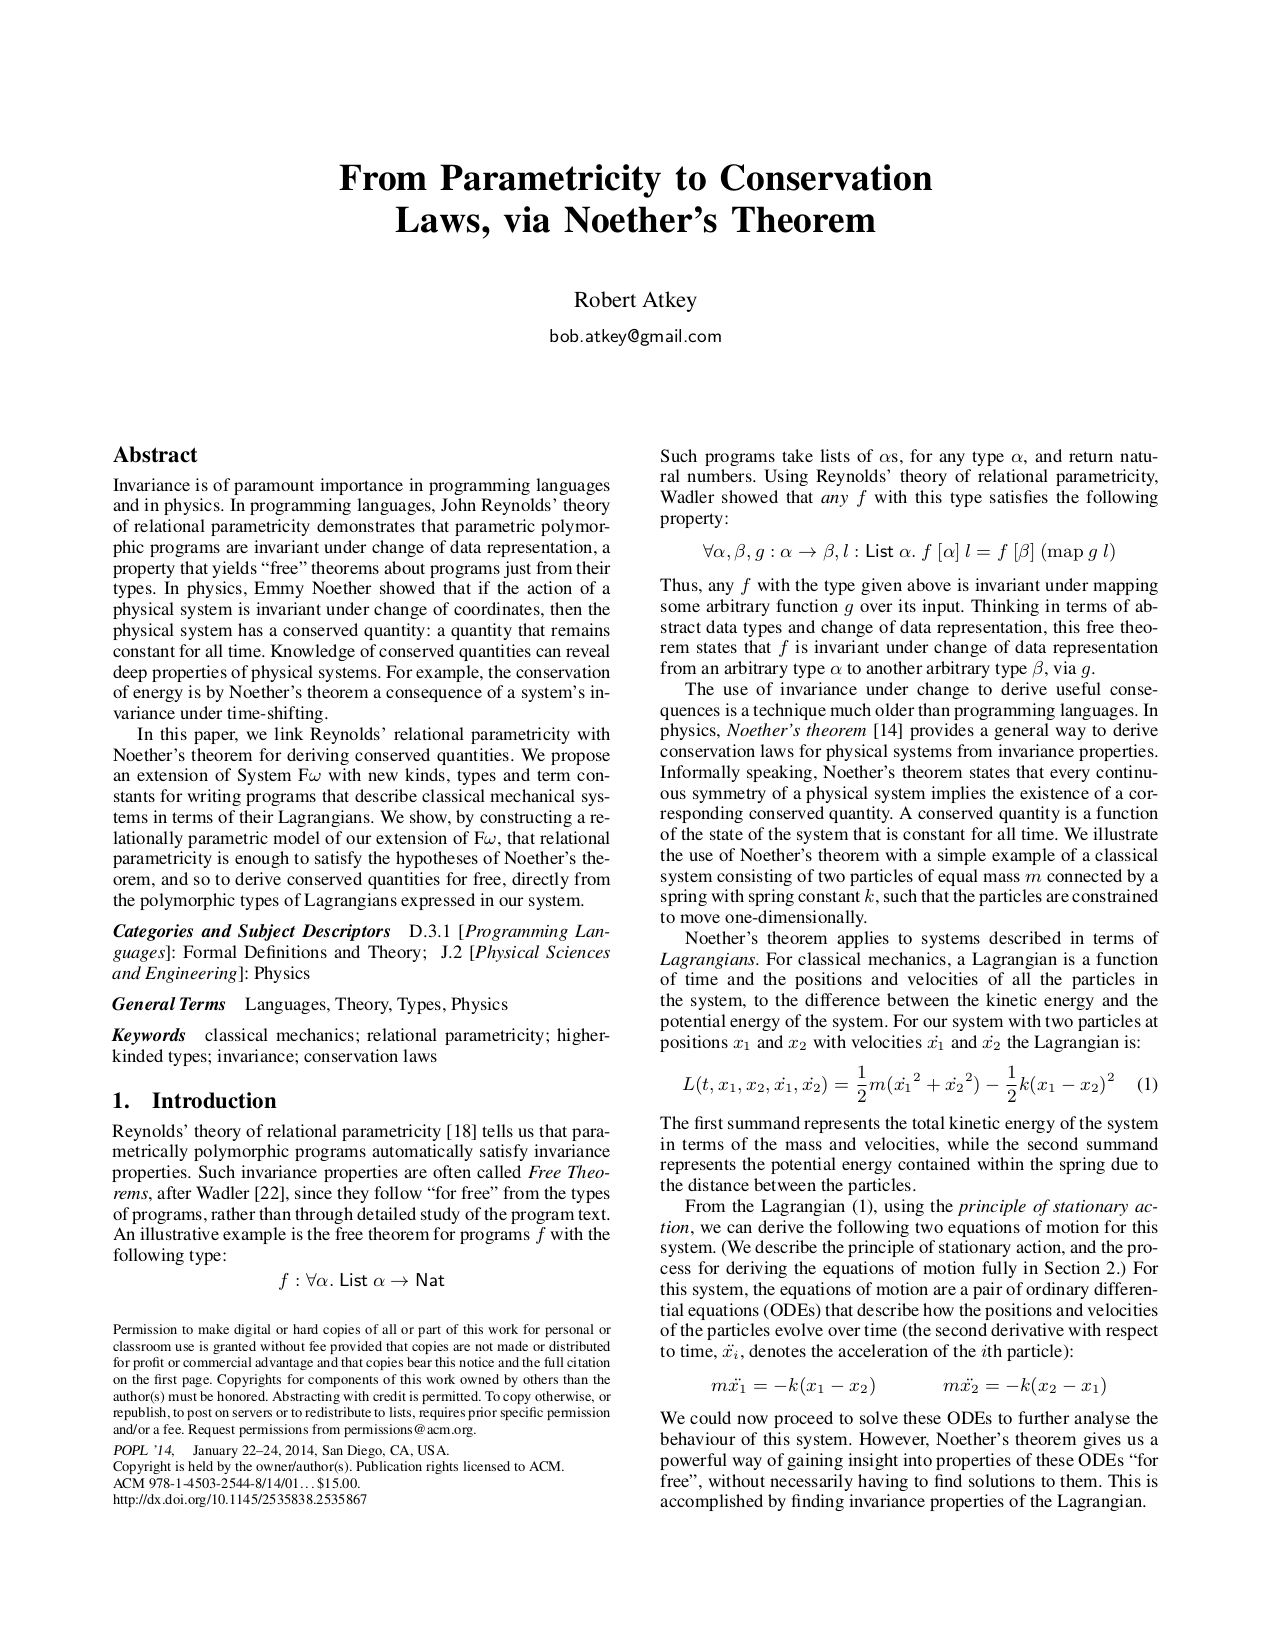 Thumbnail of "From Parametricity to Conservation Laws, via Noether's Theorem" paper